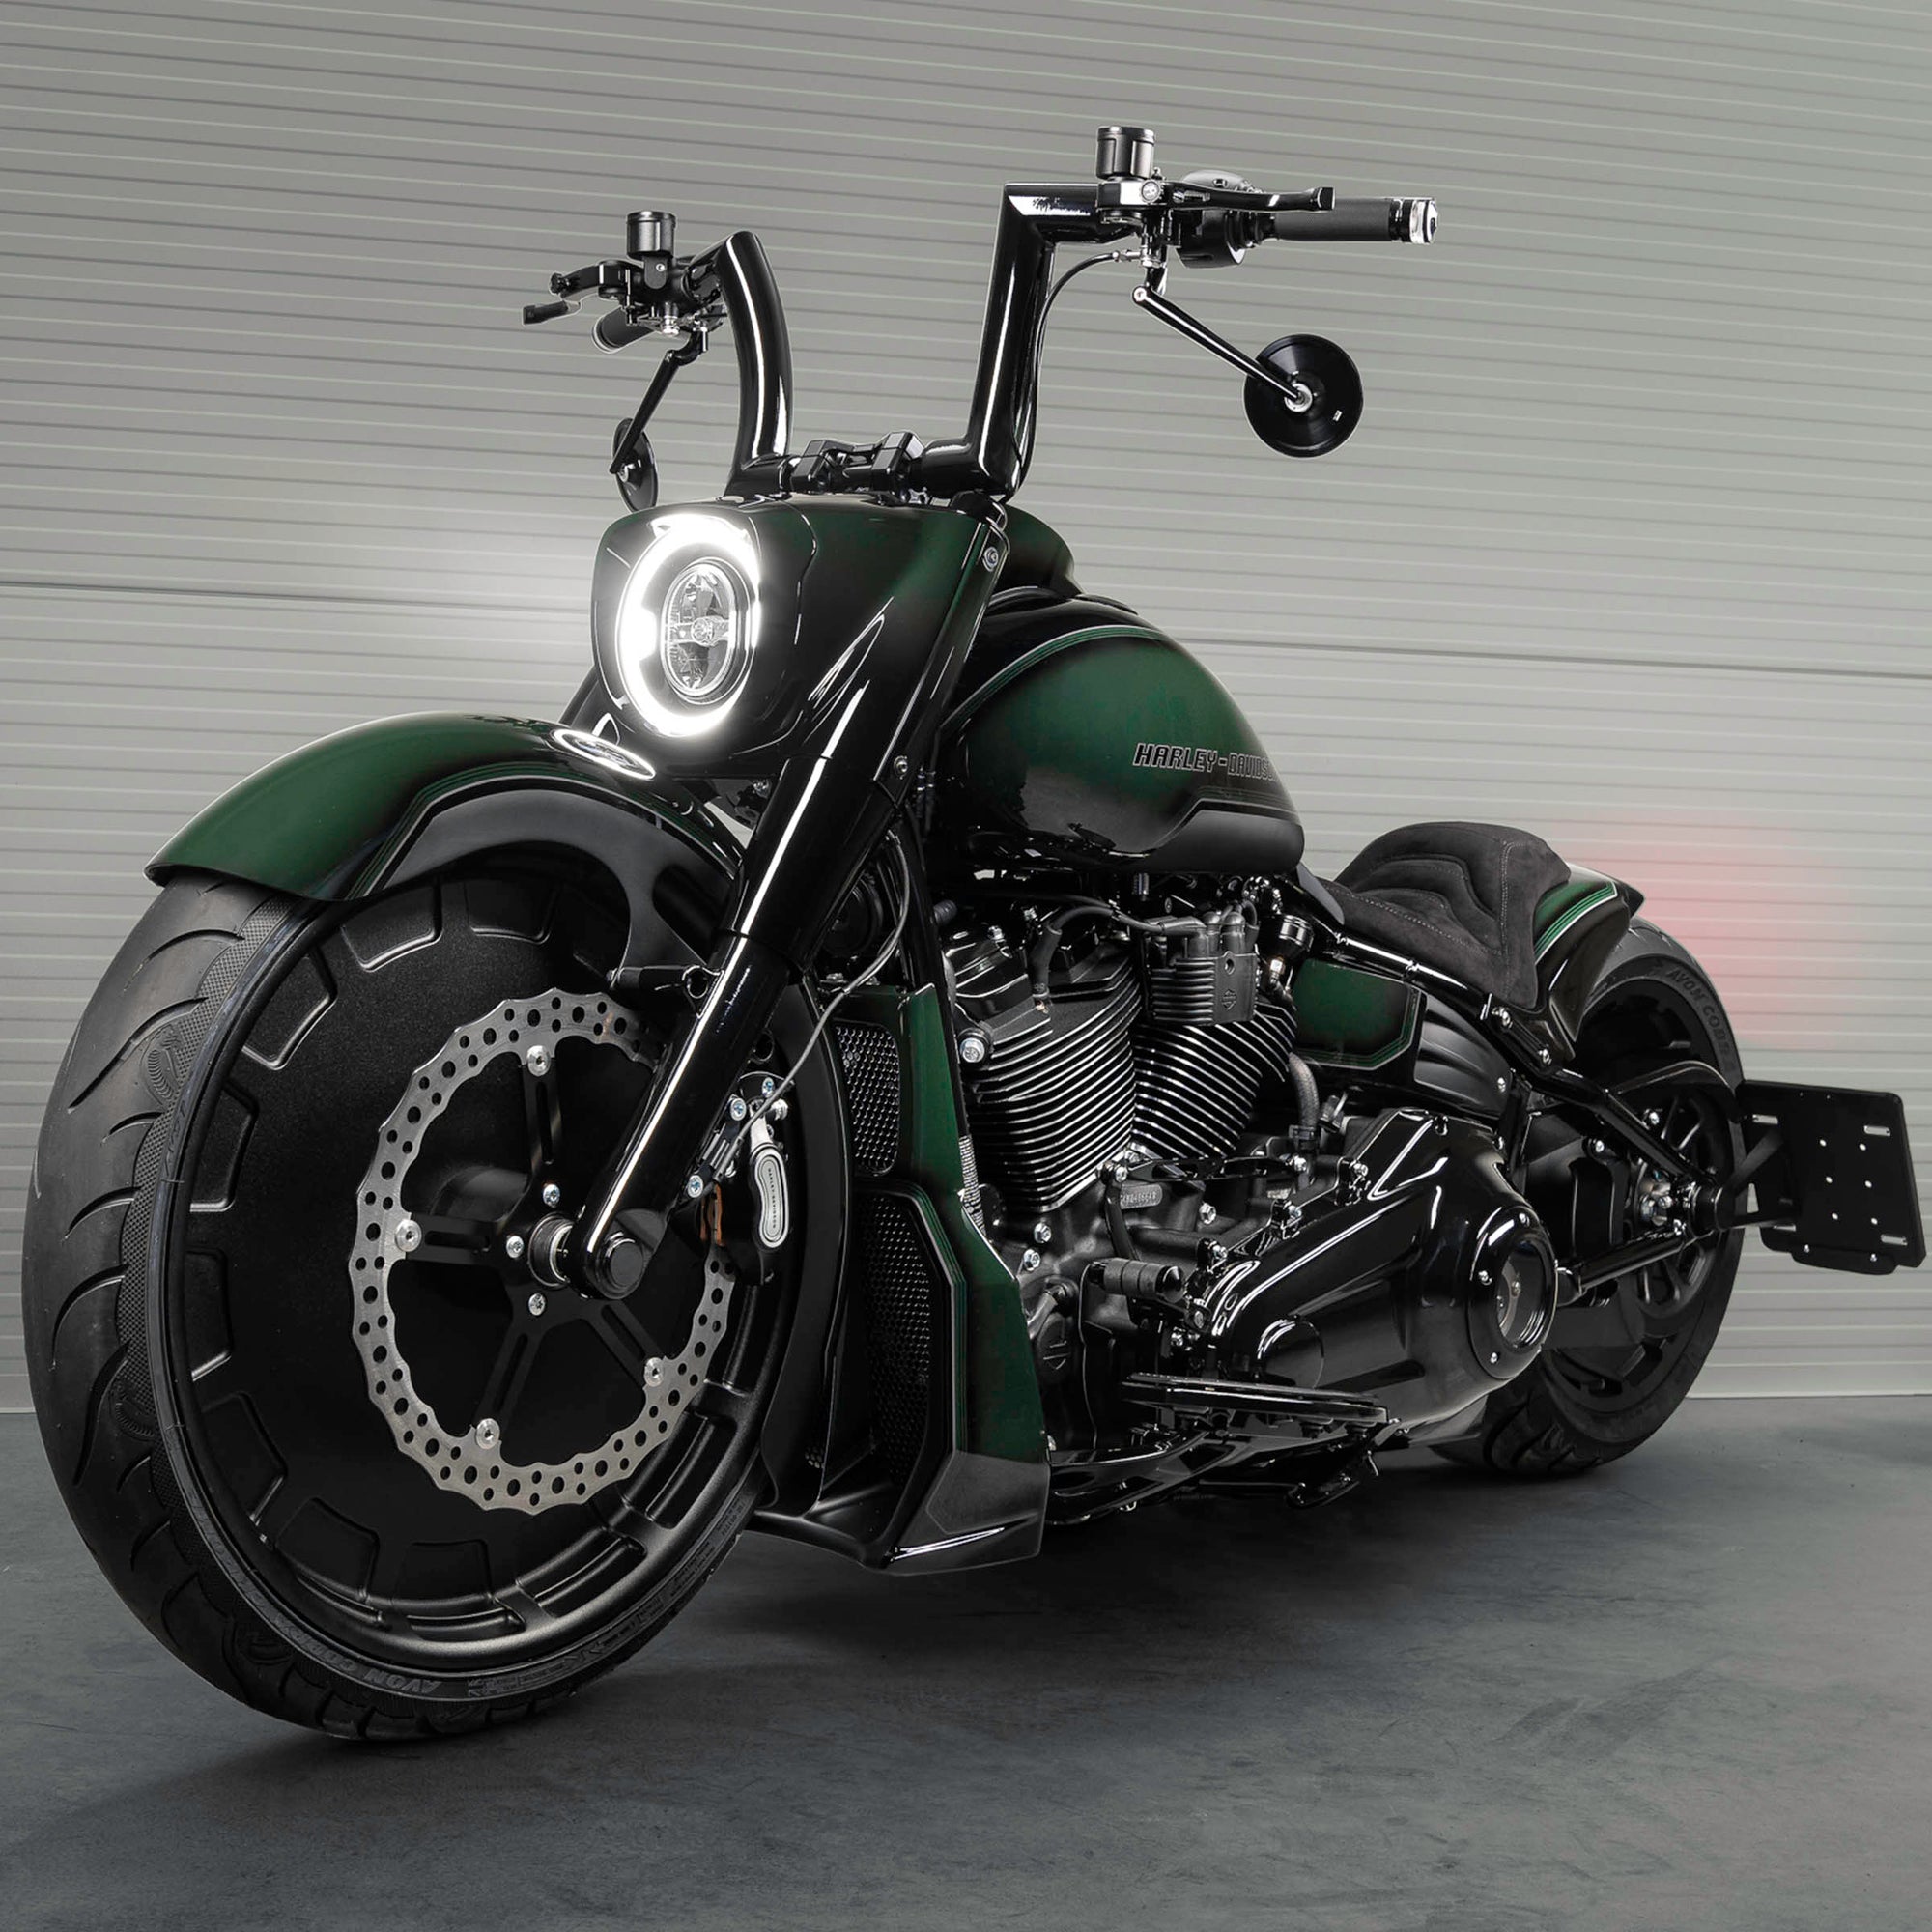 Modified Harley Davidson Fat Boy motorcycle with Killer Custom parts from the front in a spacious and modern garage